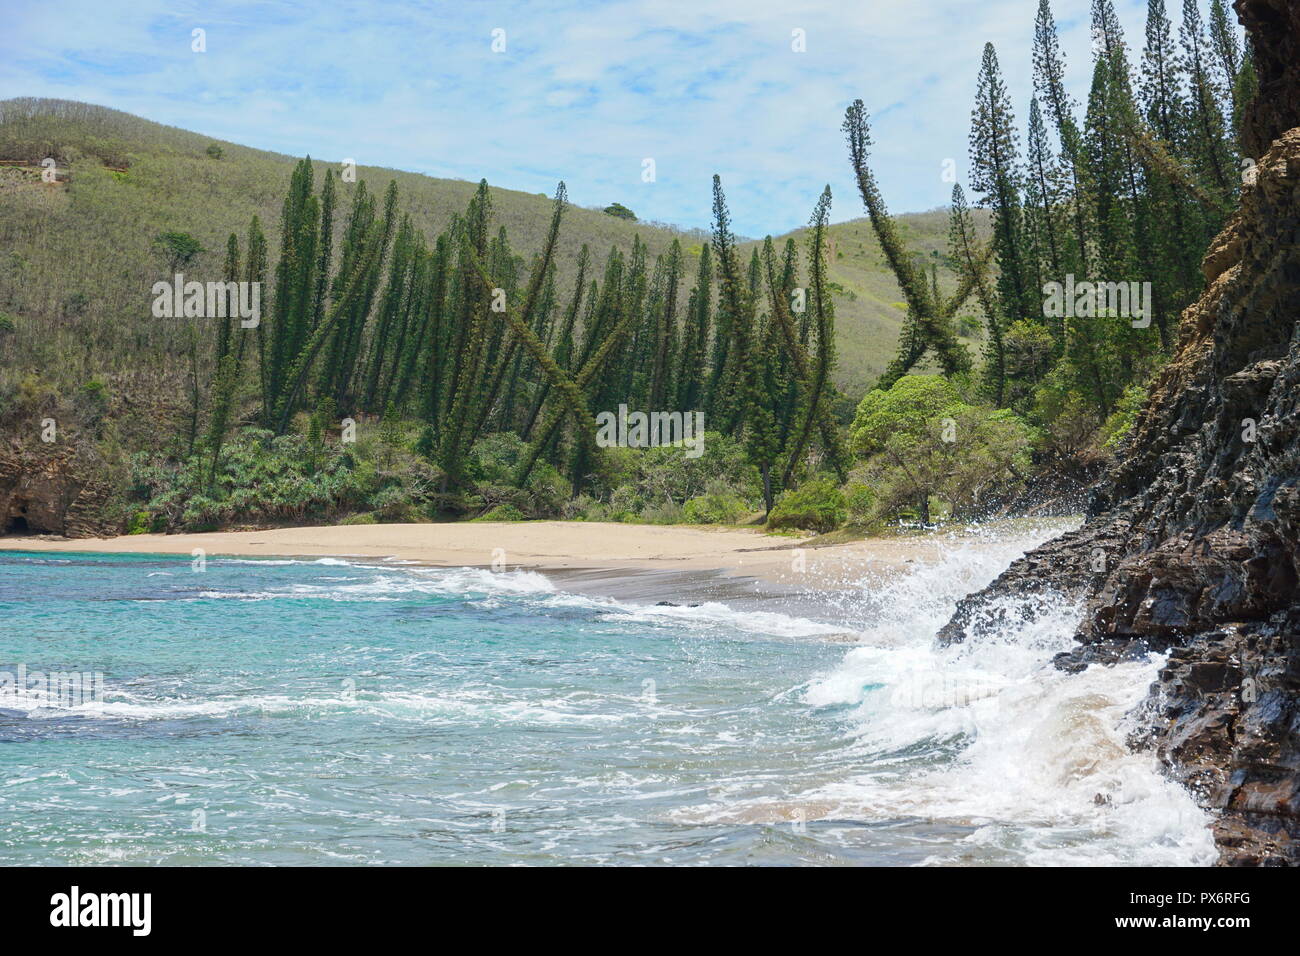 New Caledonia coastal landscape, wild beach with pine trees, Bourail, Grande Terre island, south Pacific Stock Photo